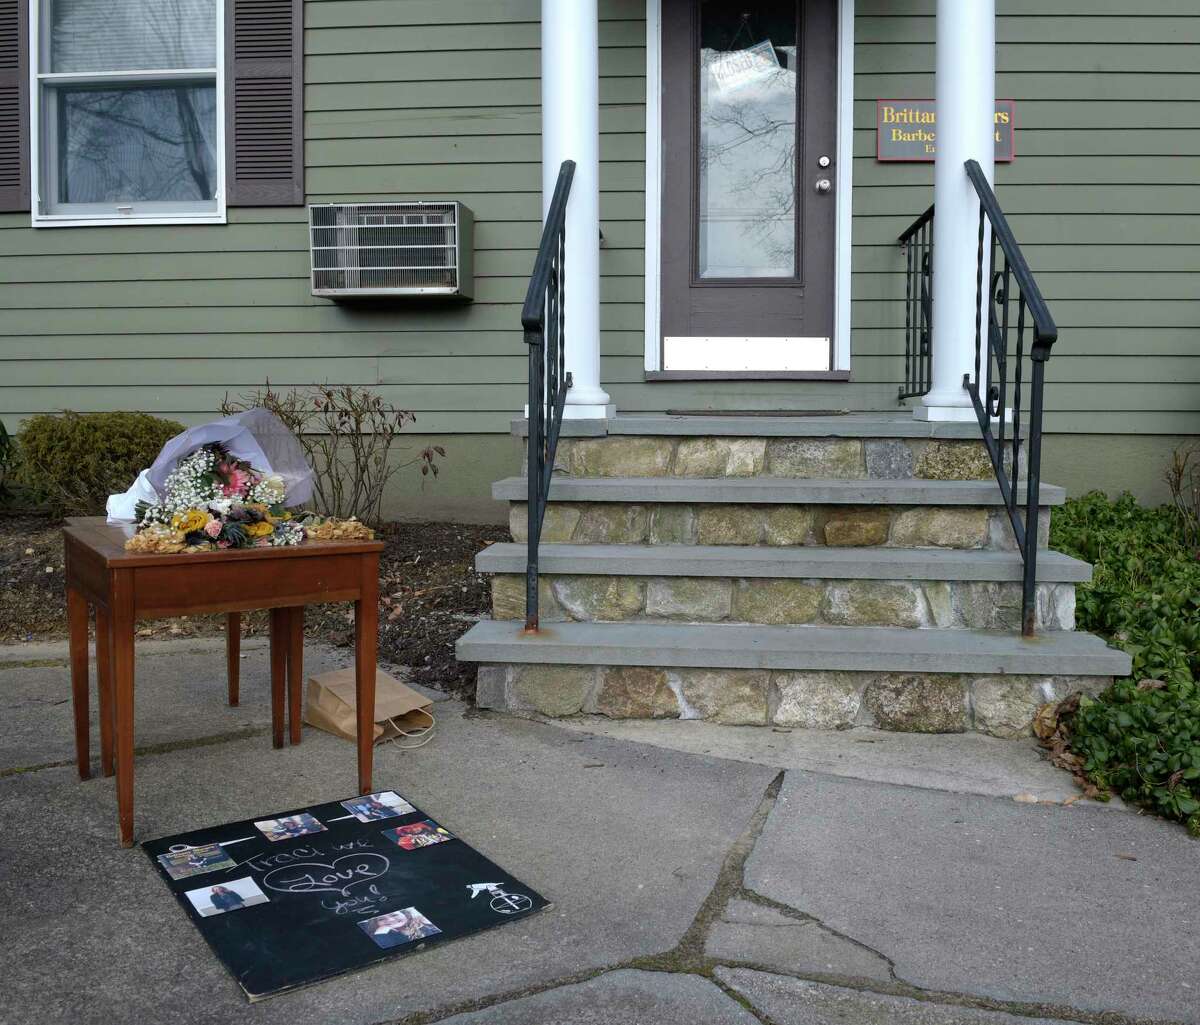 A table has been set up in front of the Brittany Shears hair salon where people have left flowers and mementos honoring Traci-Marie Jones. Jones, a 52-year-old mother of three who worked at the salon, was killed at her Reservoir Street home on Tuesday. Bethel, Conn, Friday, February, 3, 2023.